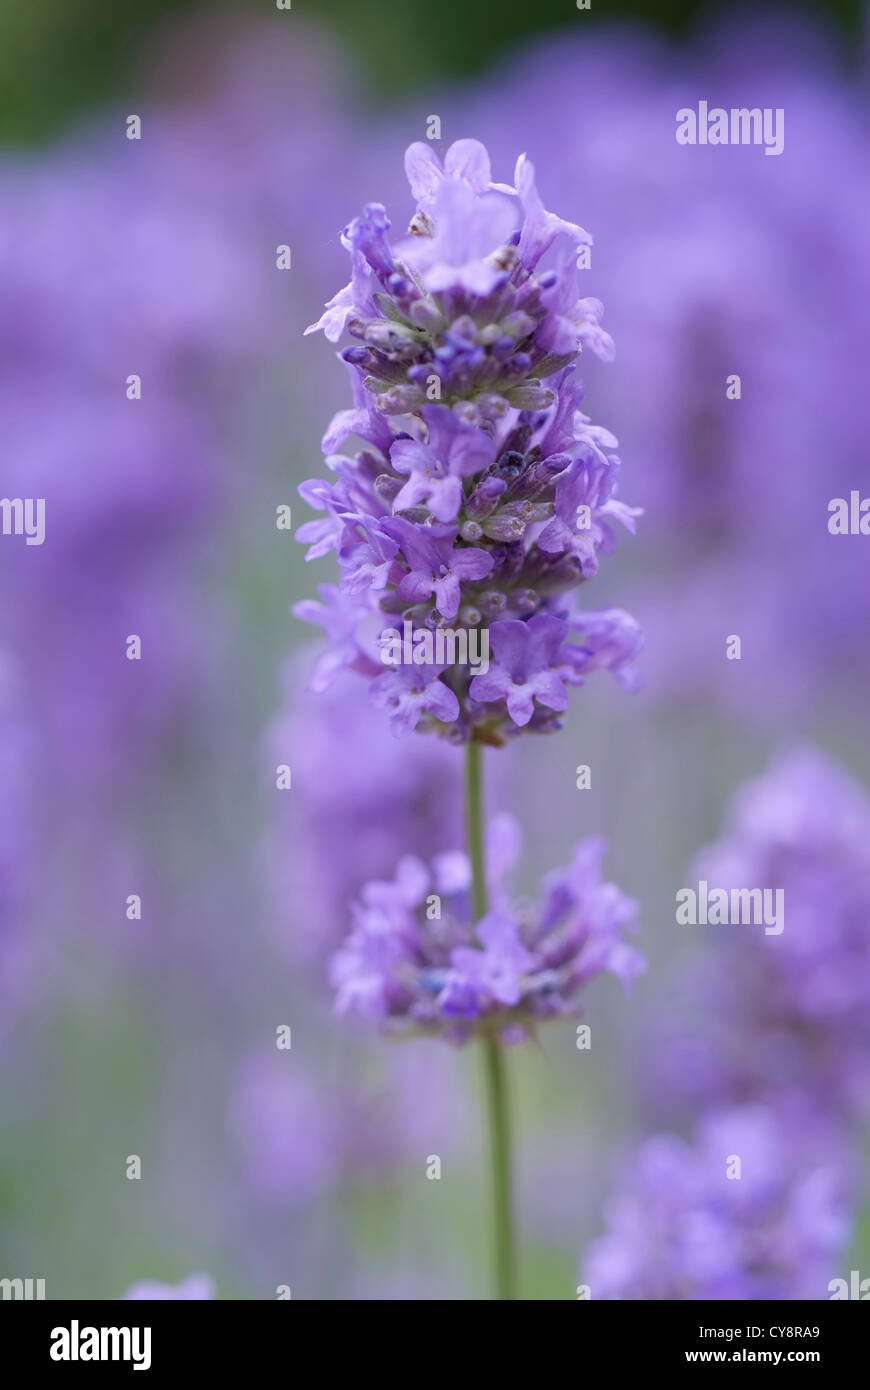 Lavandula angustifolia, Lavender, single purple flower spike isolated in shallow focus against other lavender. Stock Photo